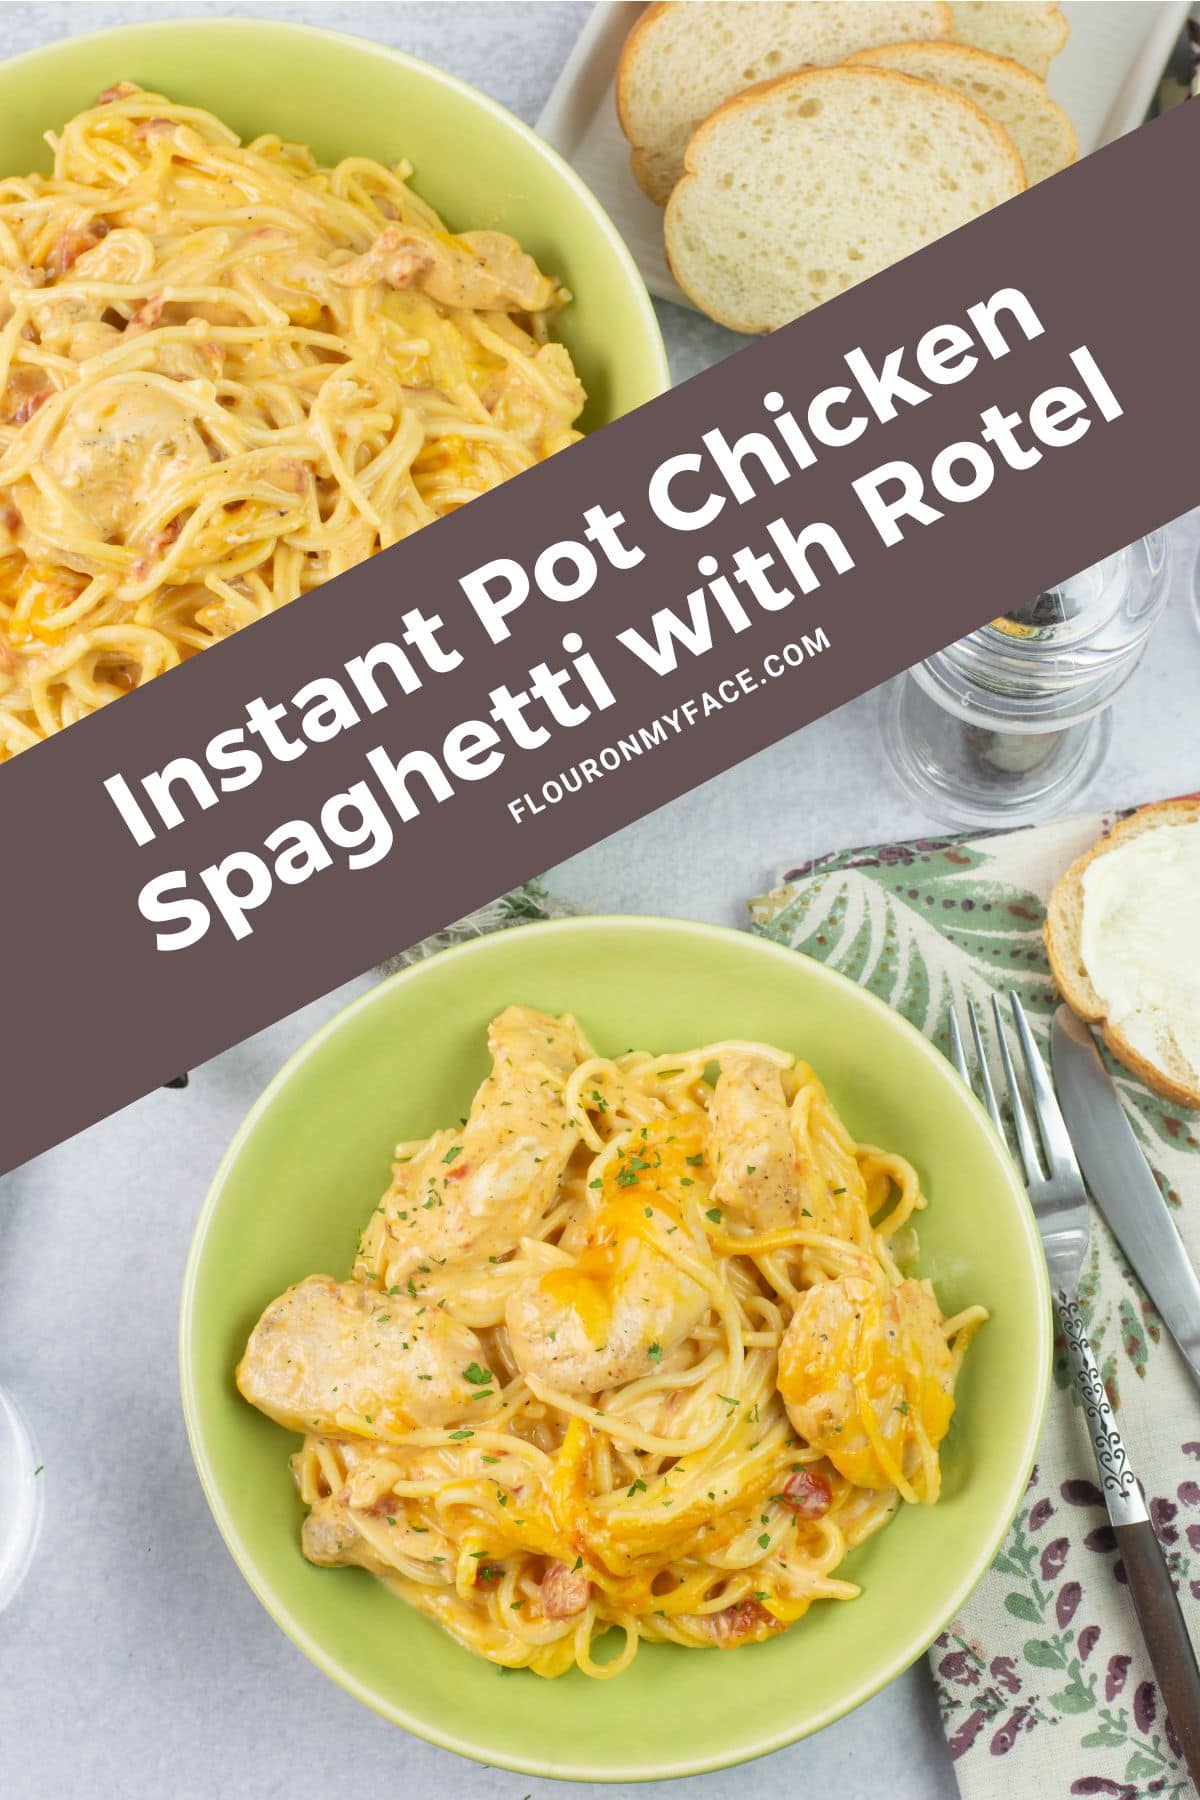 Vertical featured image of a serving of Chicken Spaghetti with rotel in a dinner bowl.